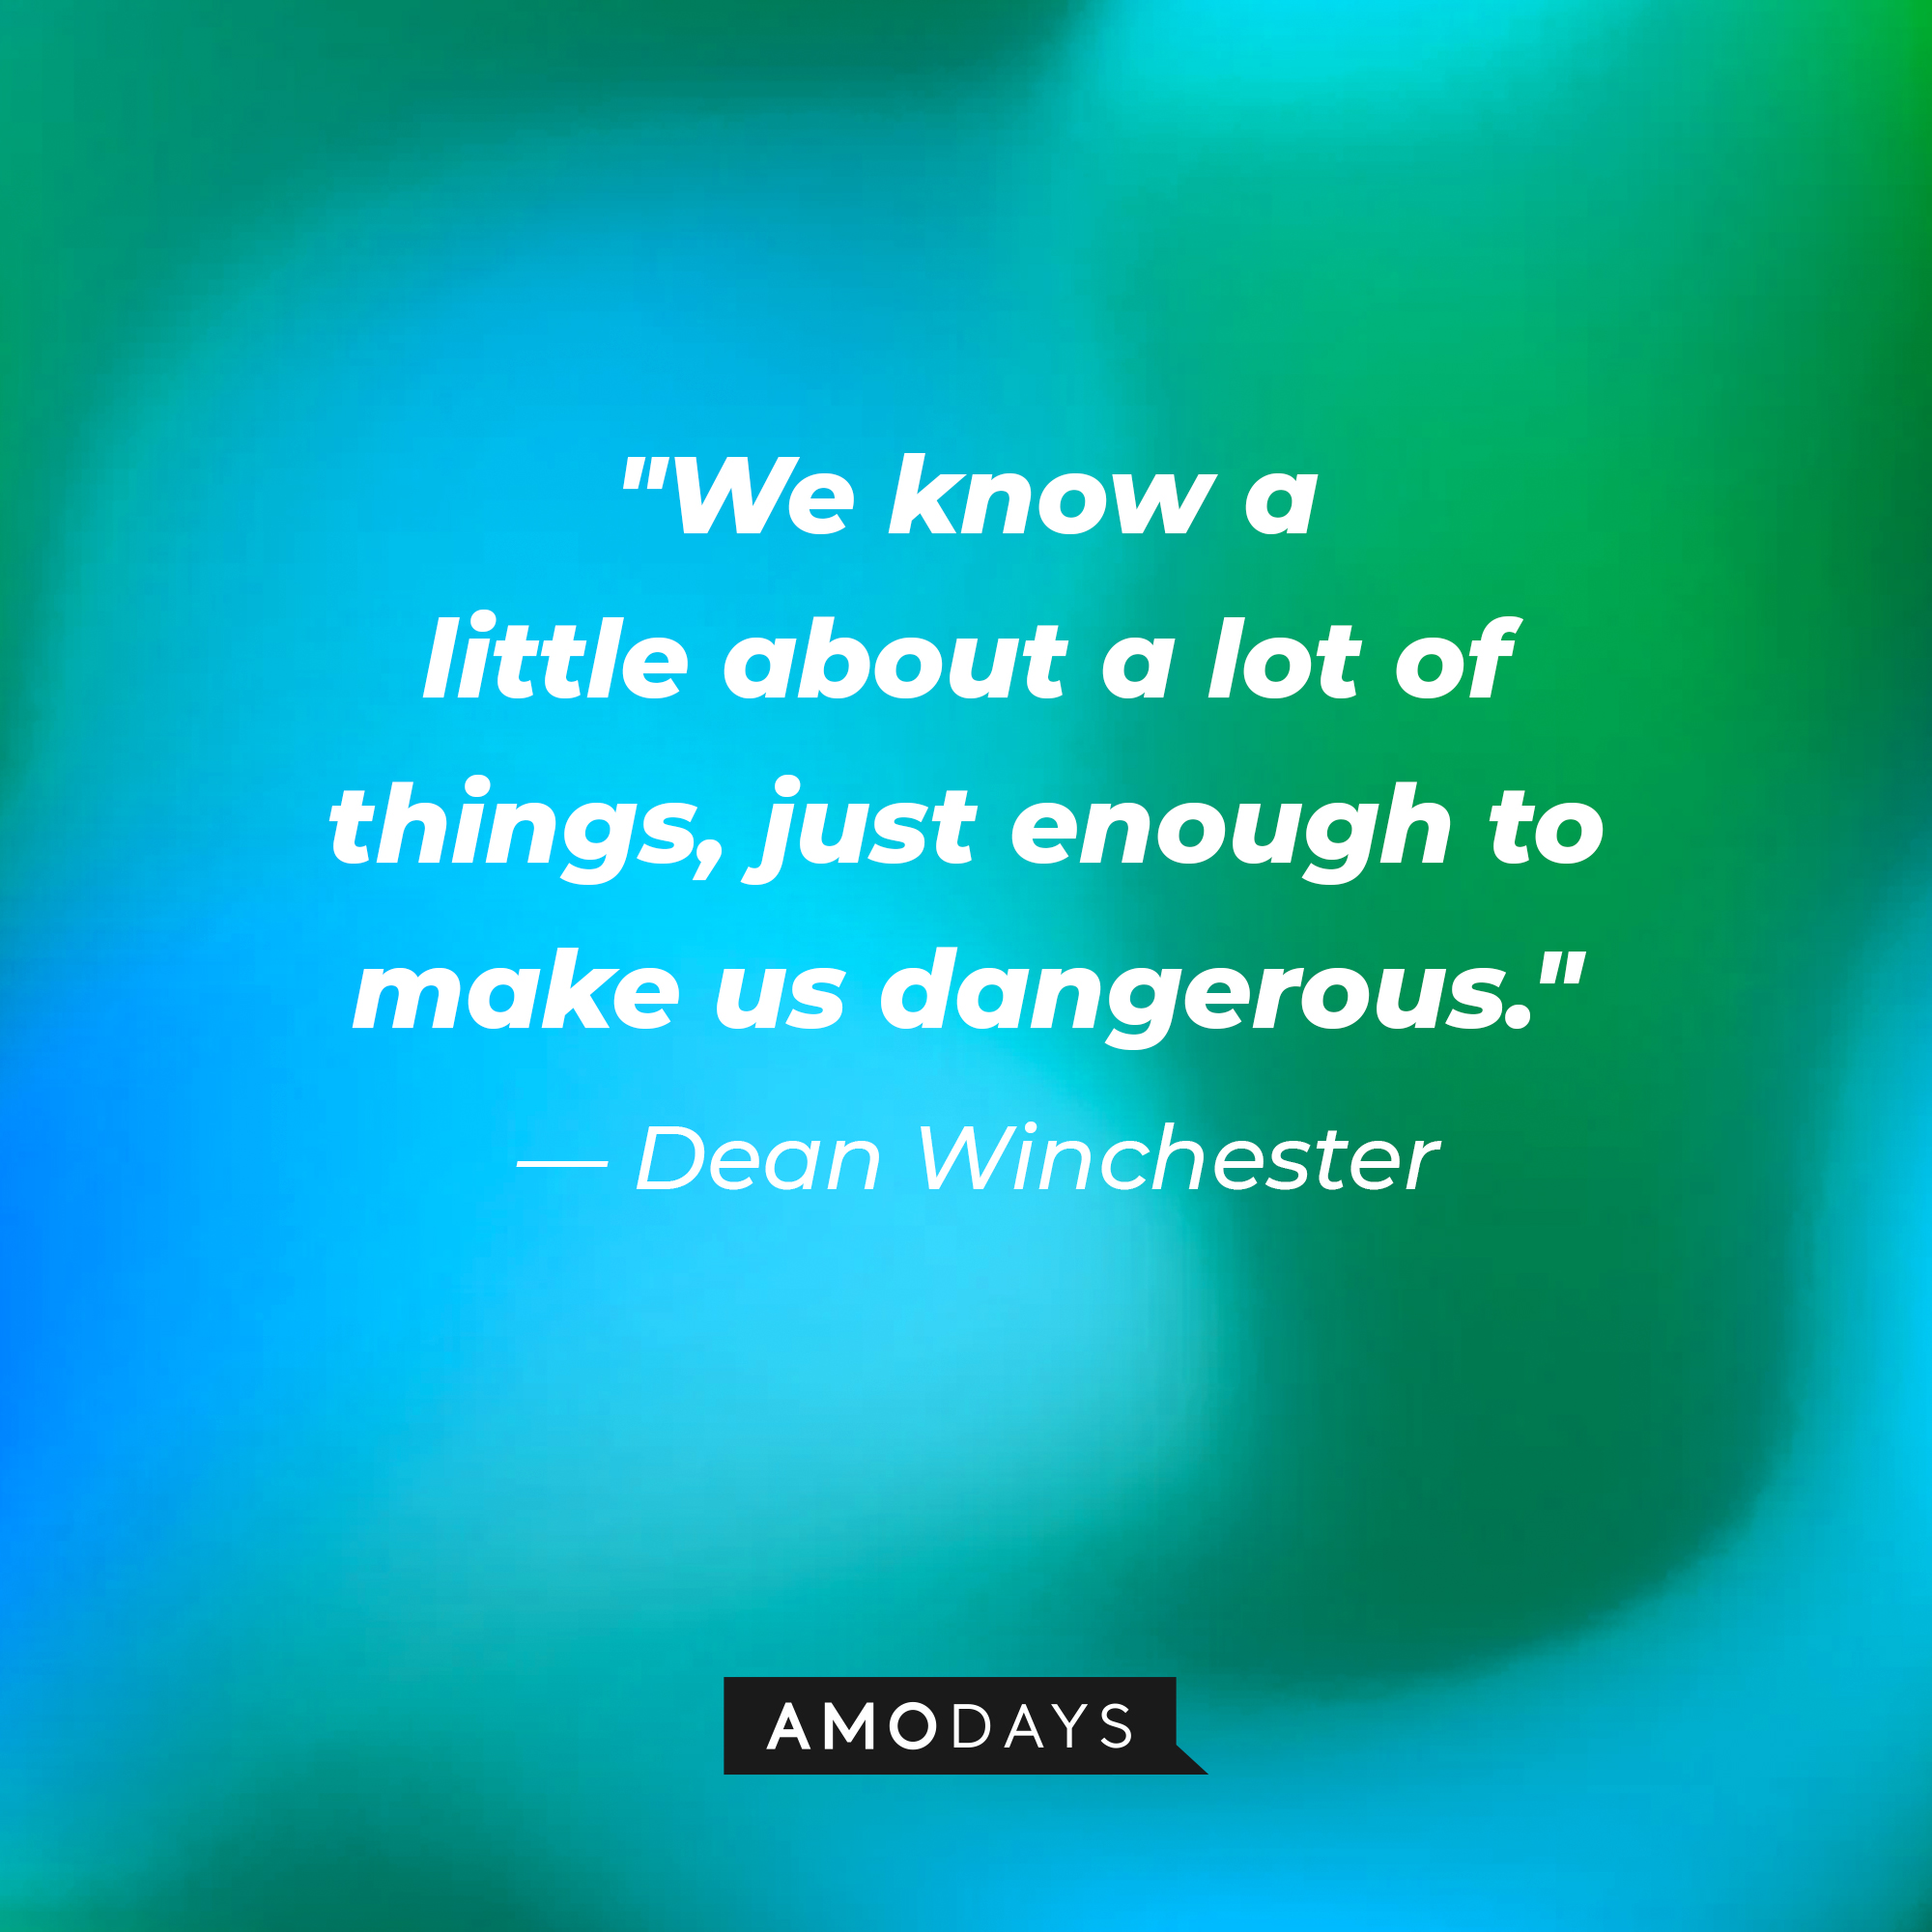 Dean Winchester's quote, "We know a little about a lot of things, just enough to make us dangerous." | Source: Amodays